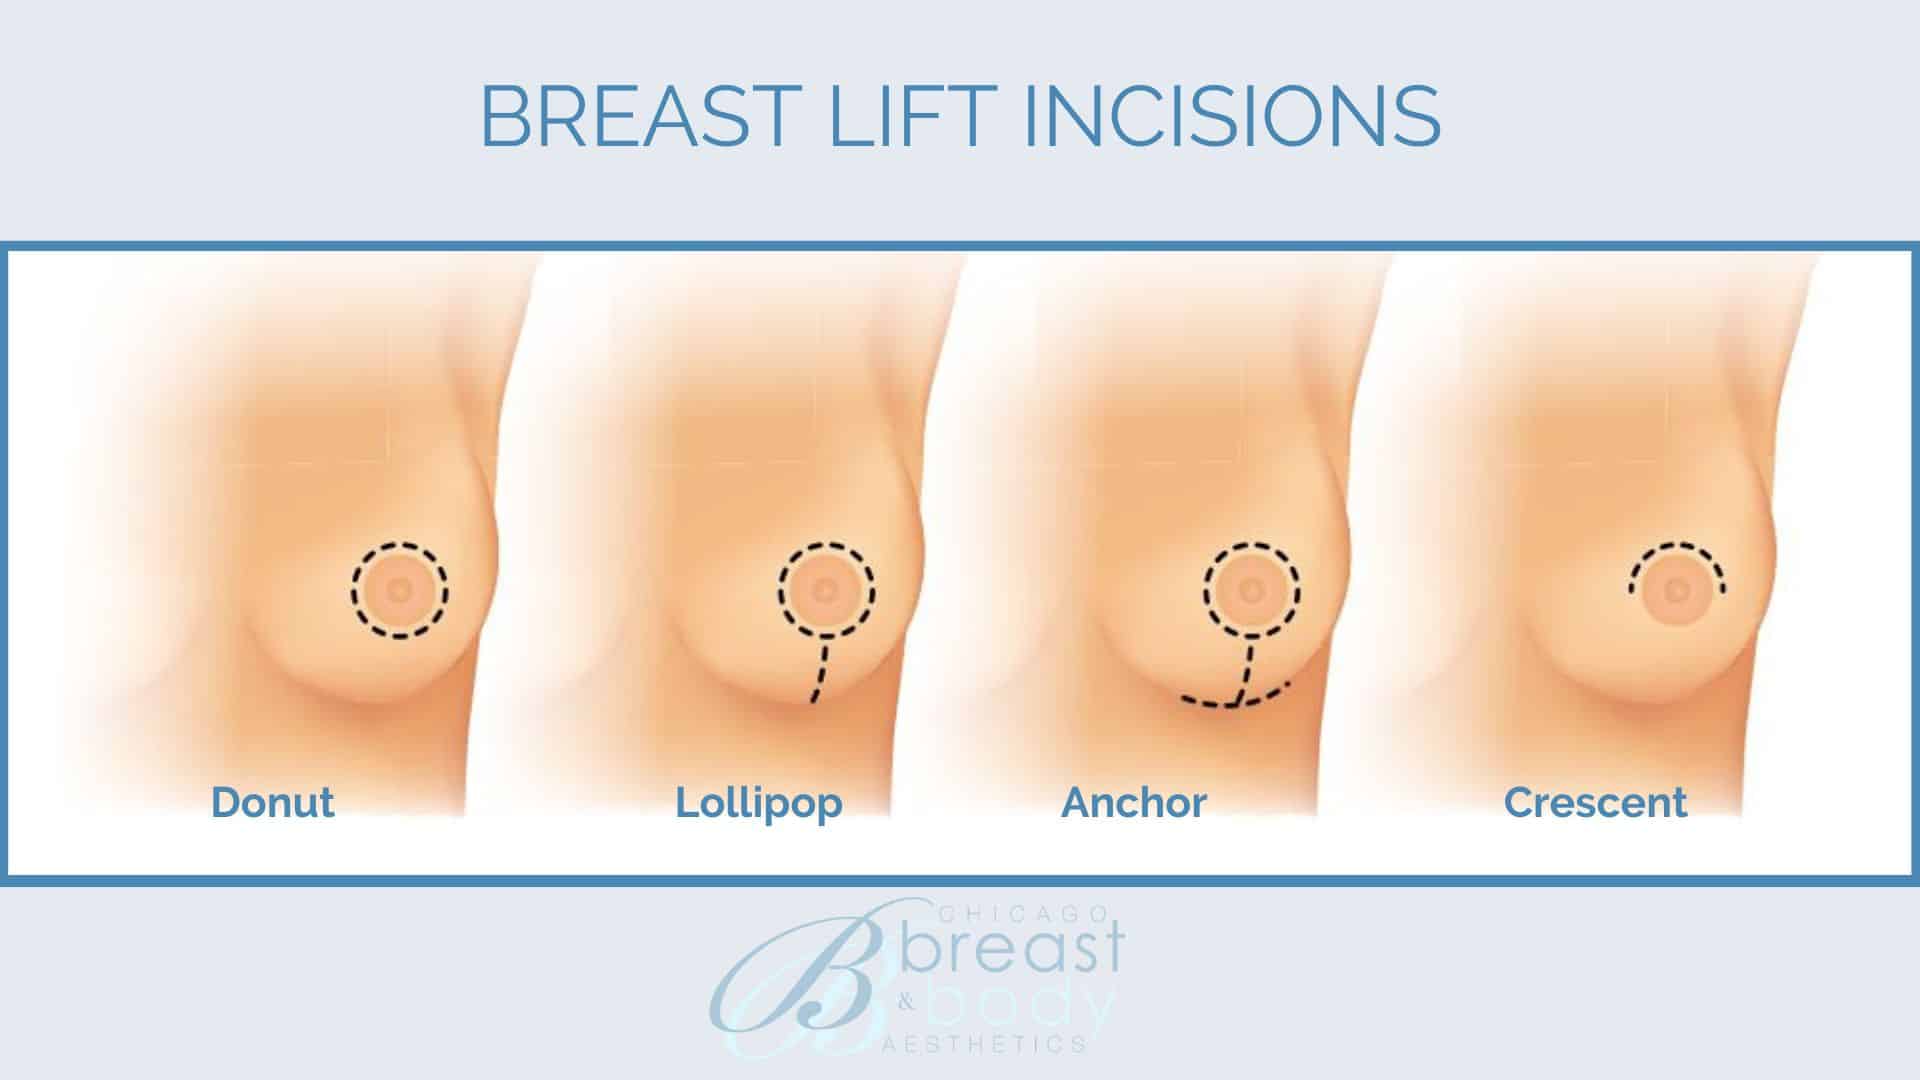 Types of breast lift incisions